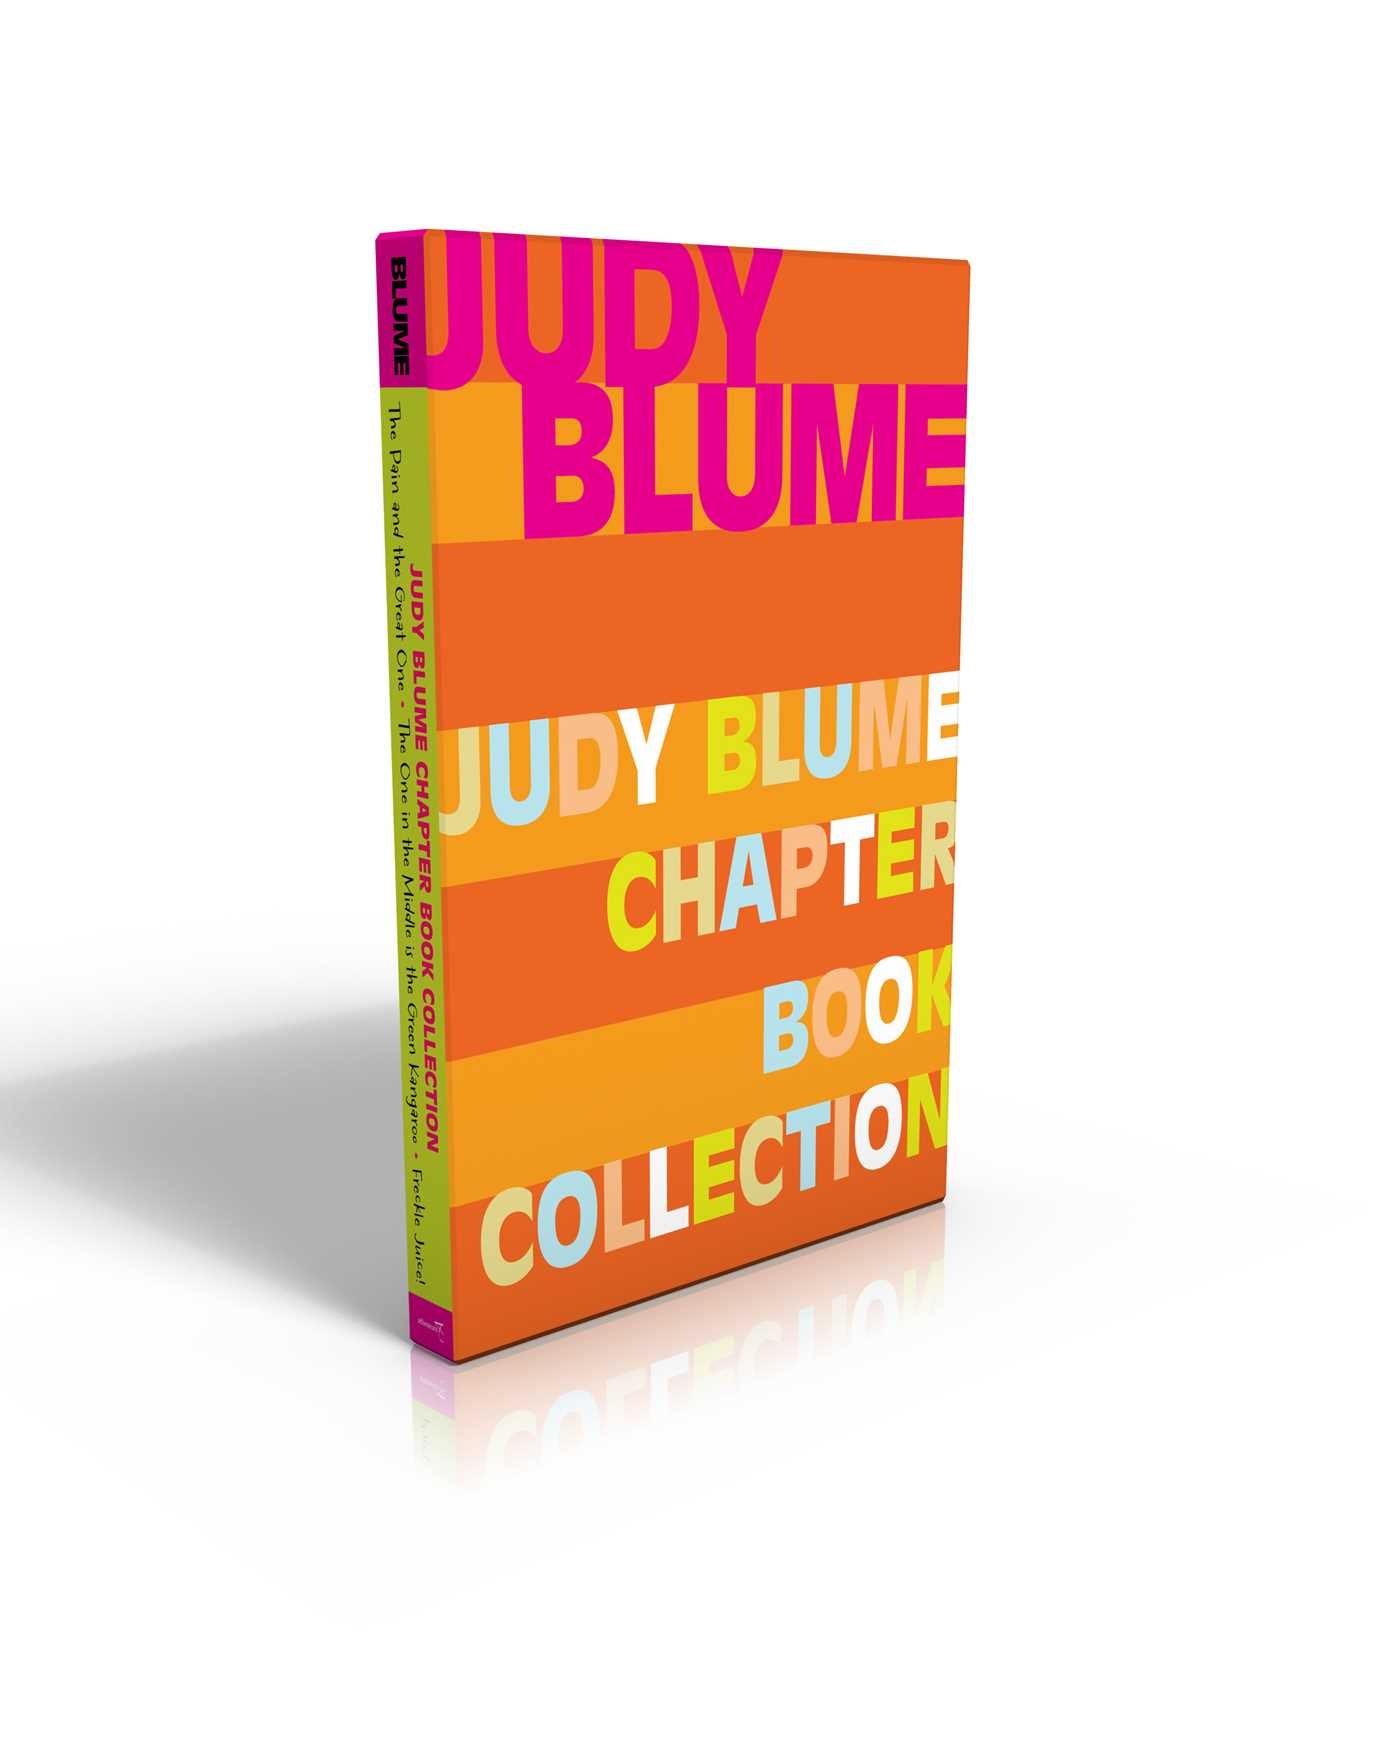 Judy Blume Chapter Book Collection (Boxed Set)